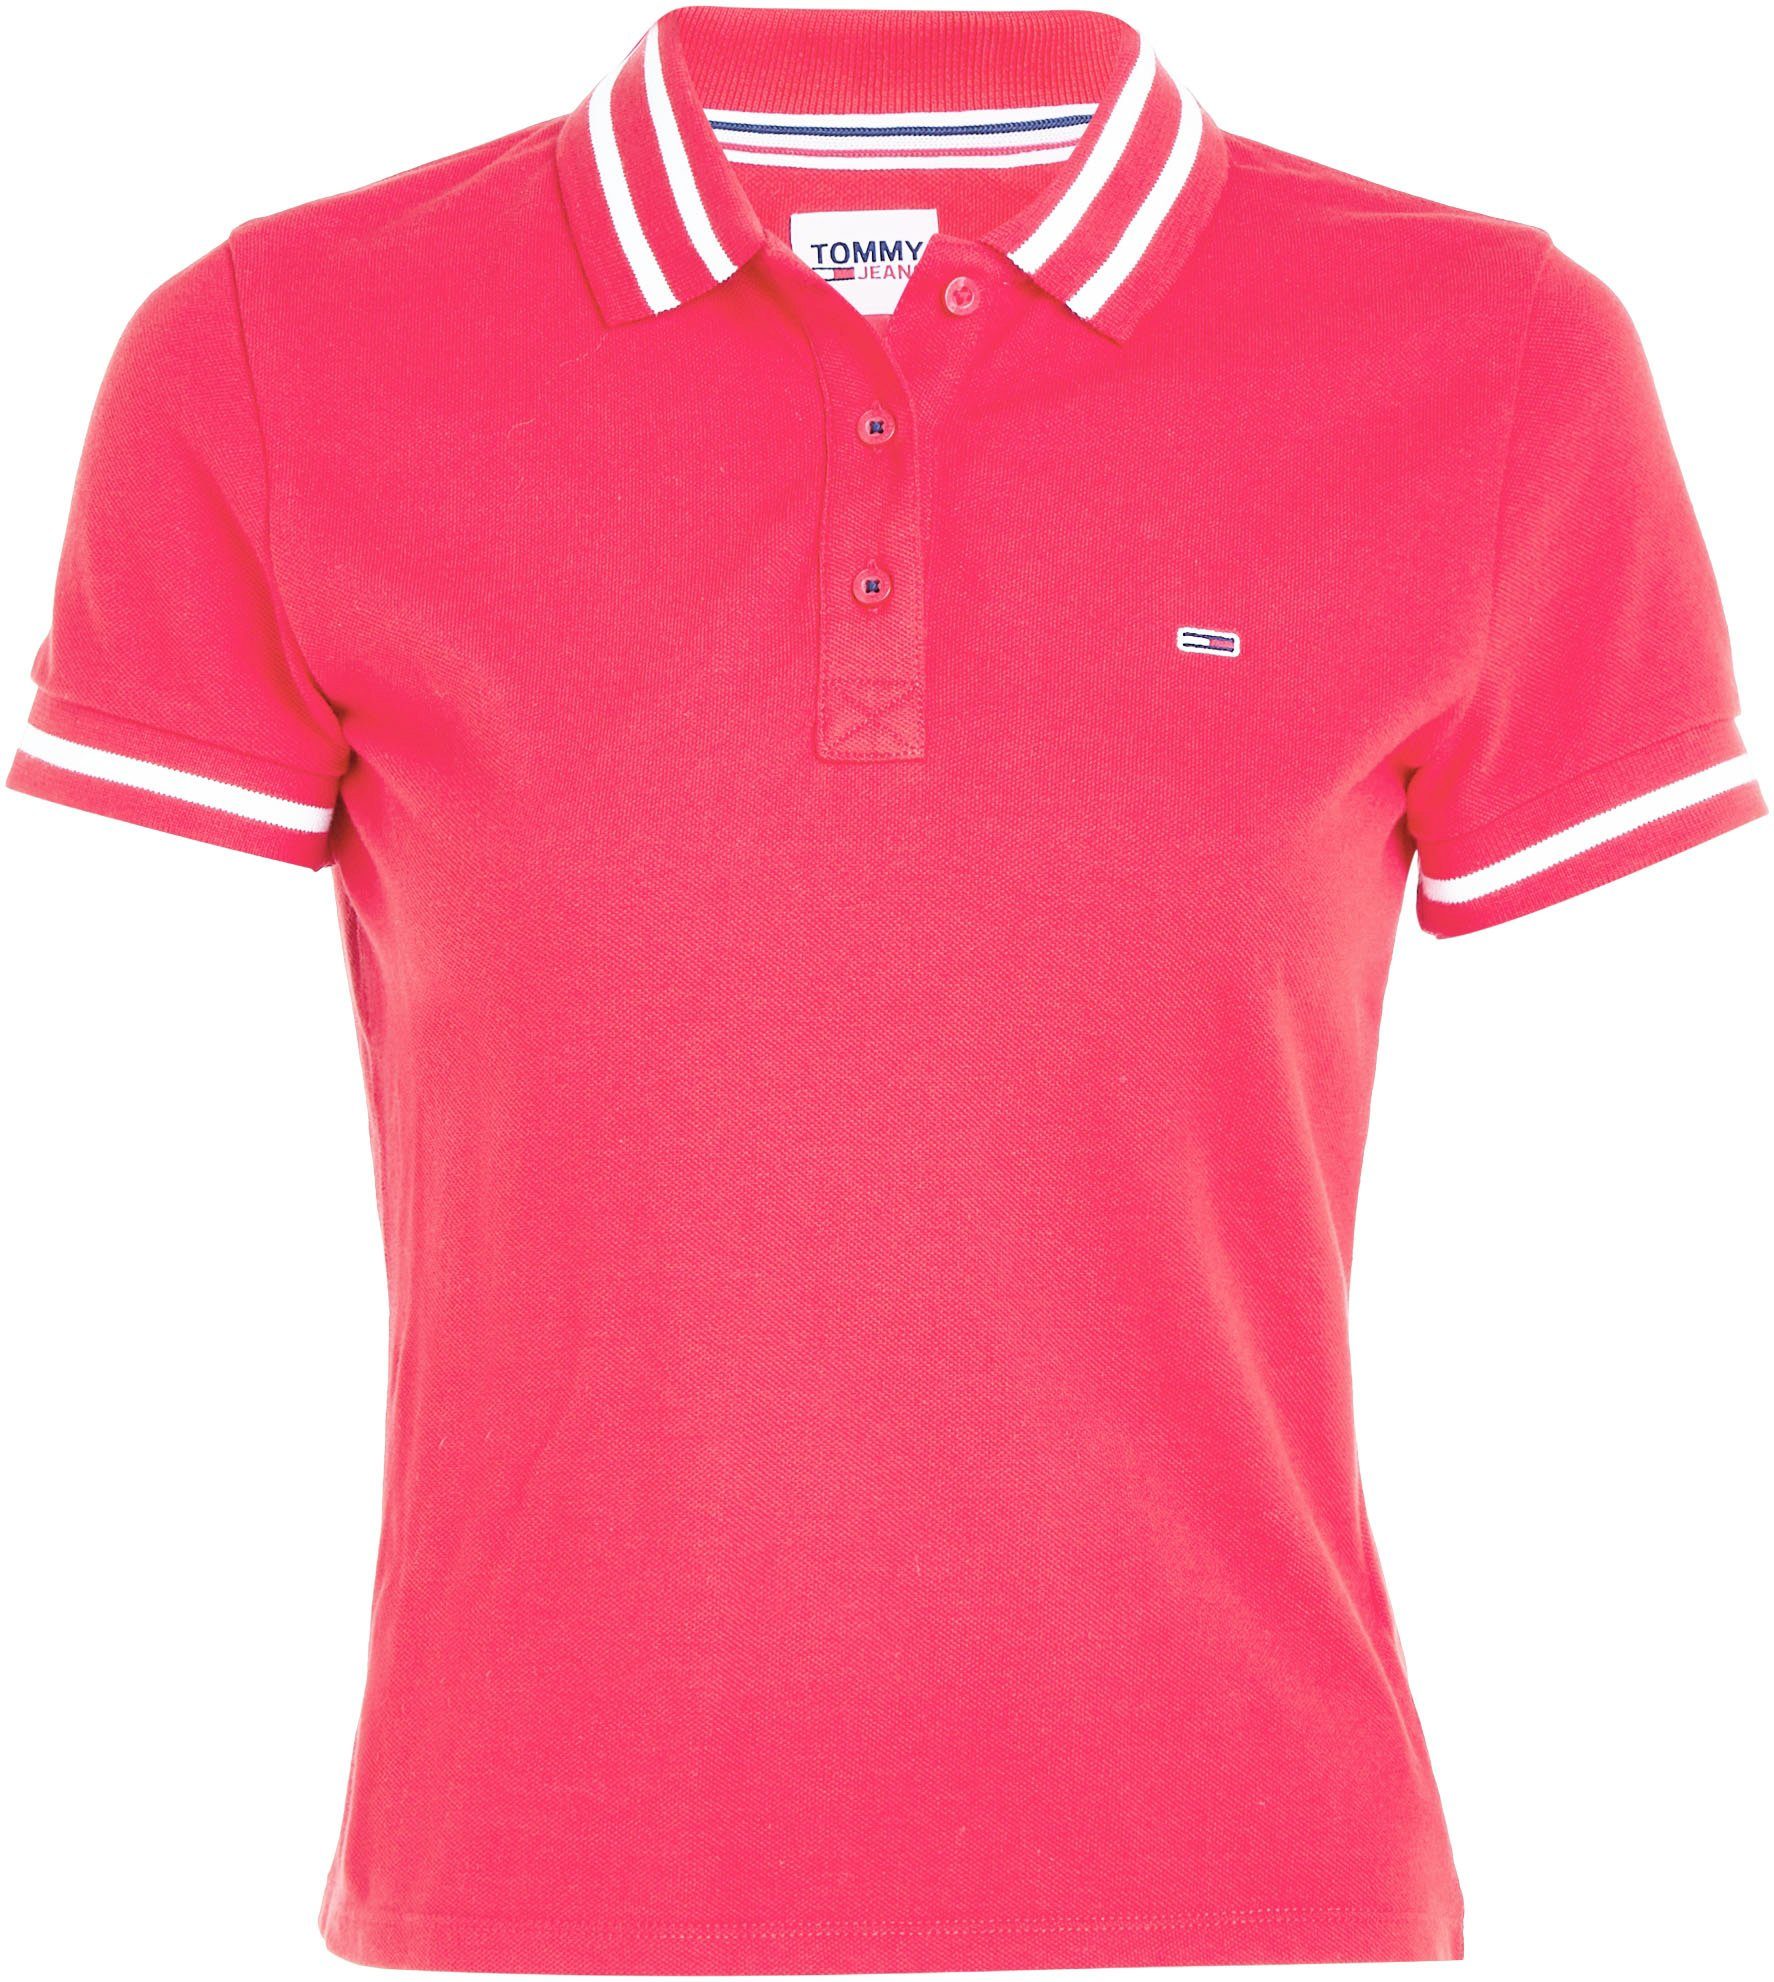 Tommy Jeans Poloshirt TJW ESSENTIAL TIPPING Deep-Crimson Jeans POLO Label-Flag & Kontraststreifen Tommy mit